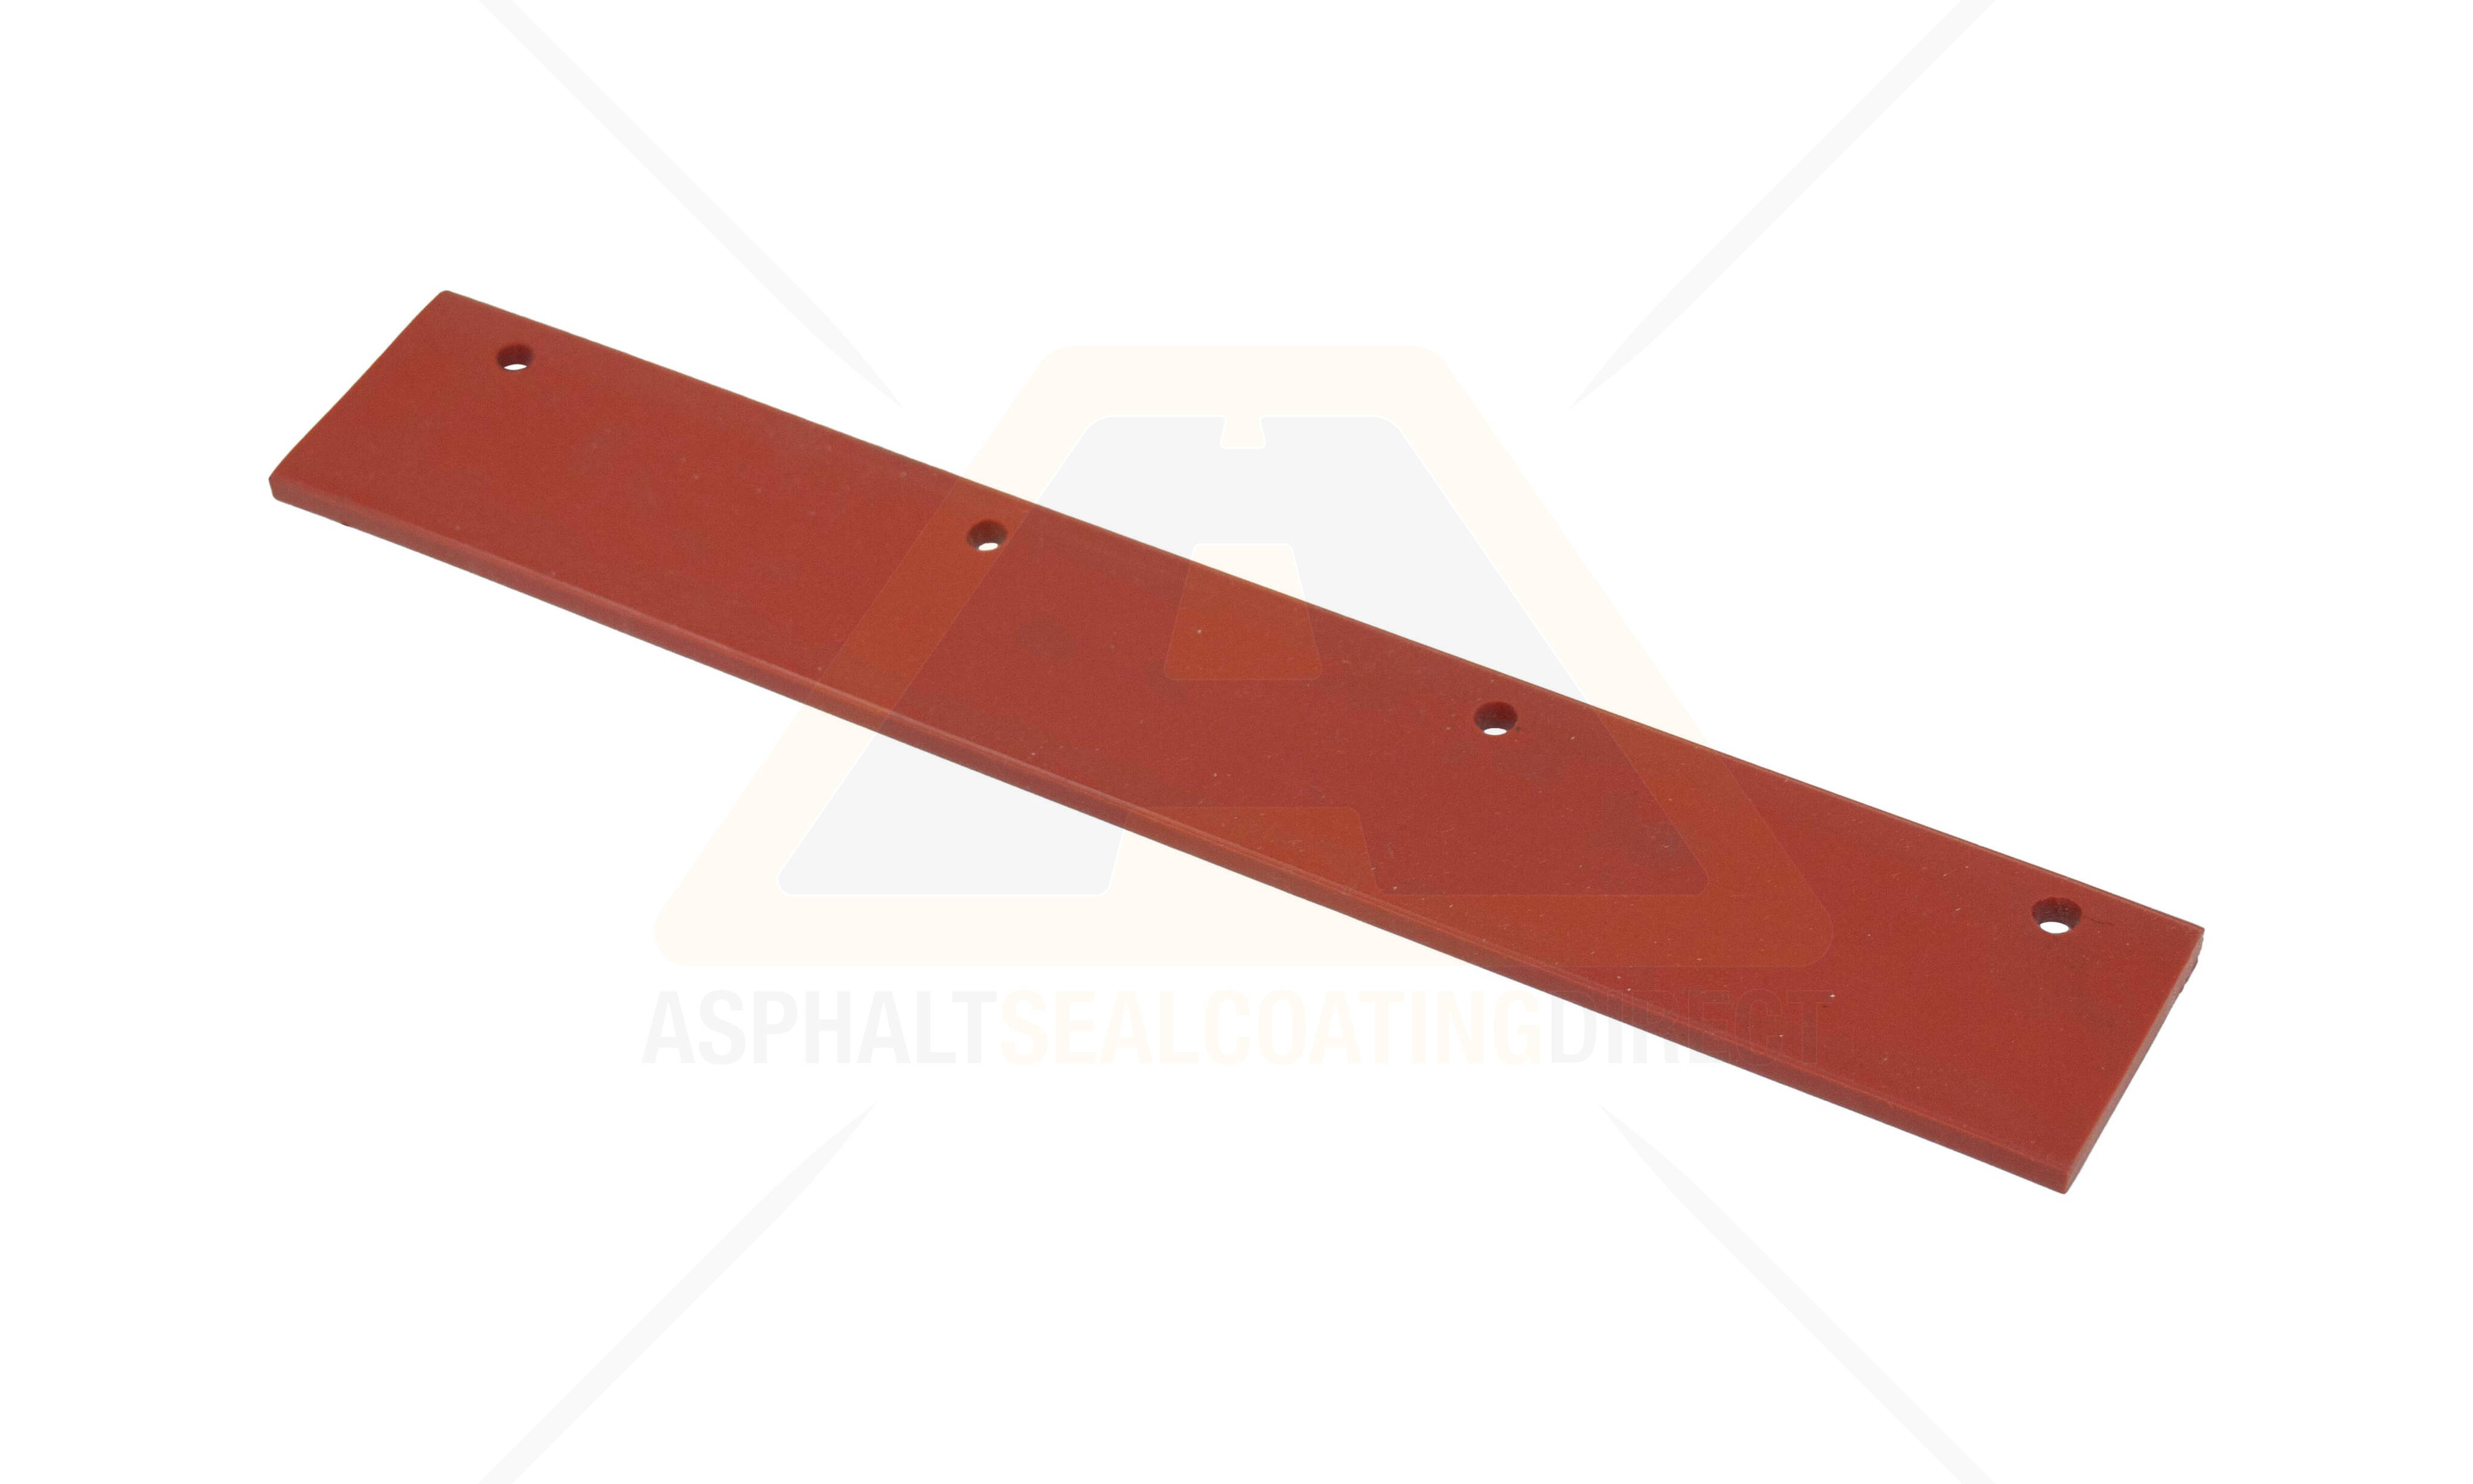 https://www.asphaltsealcoatingdirect.com/files/styles/uc_product_full/public/dynamic/content/product/image/1852/marshalltown-high-temp-red-silicone-push-pull-replacement-blade-overview-red714195.jpg?itok=q7NxFjg8